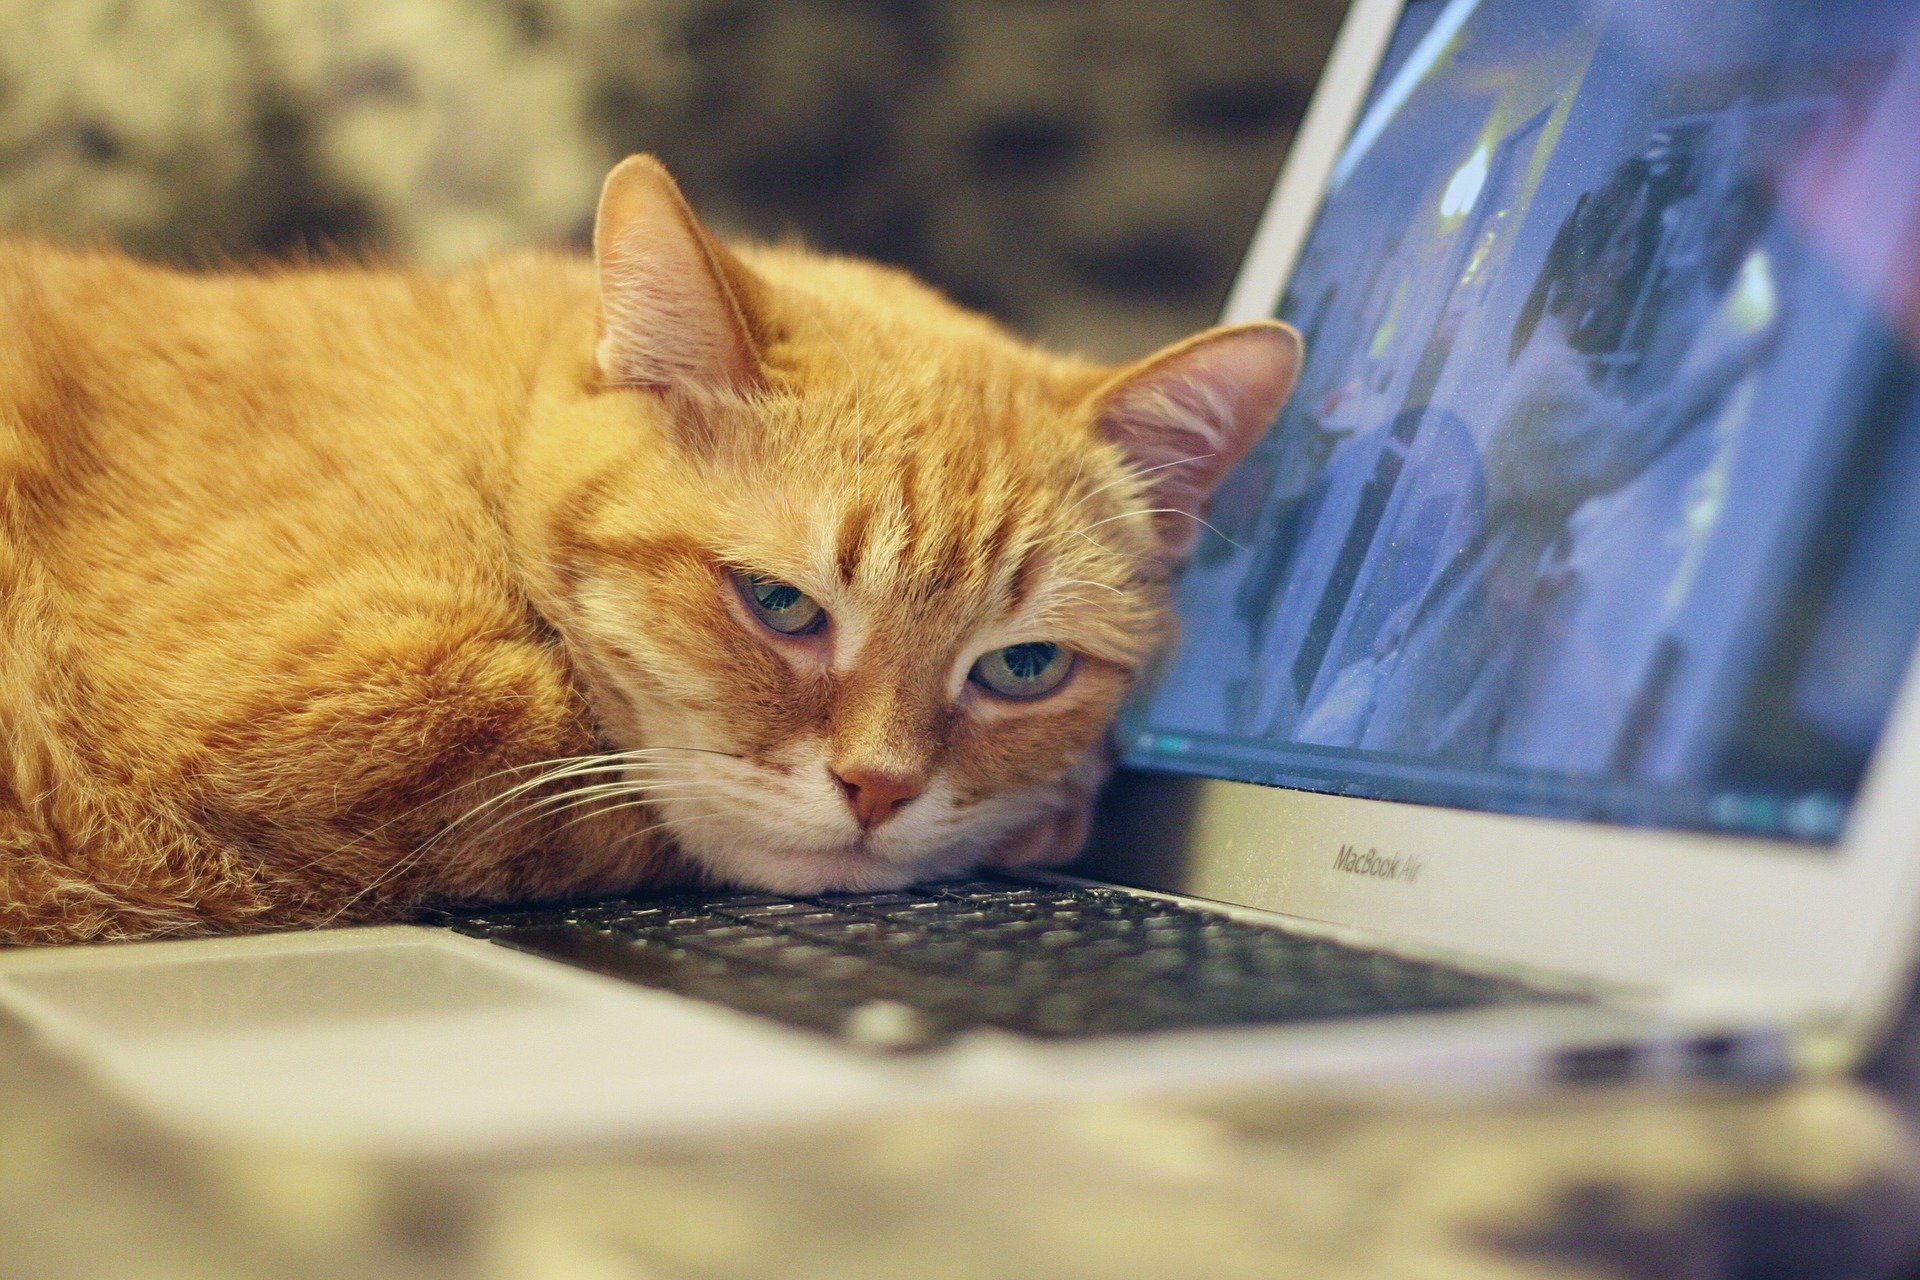 cat and laptop photo for the blog about keeping animals happy during lockdown